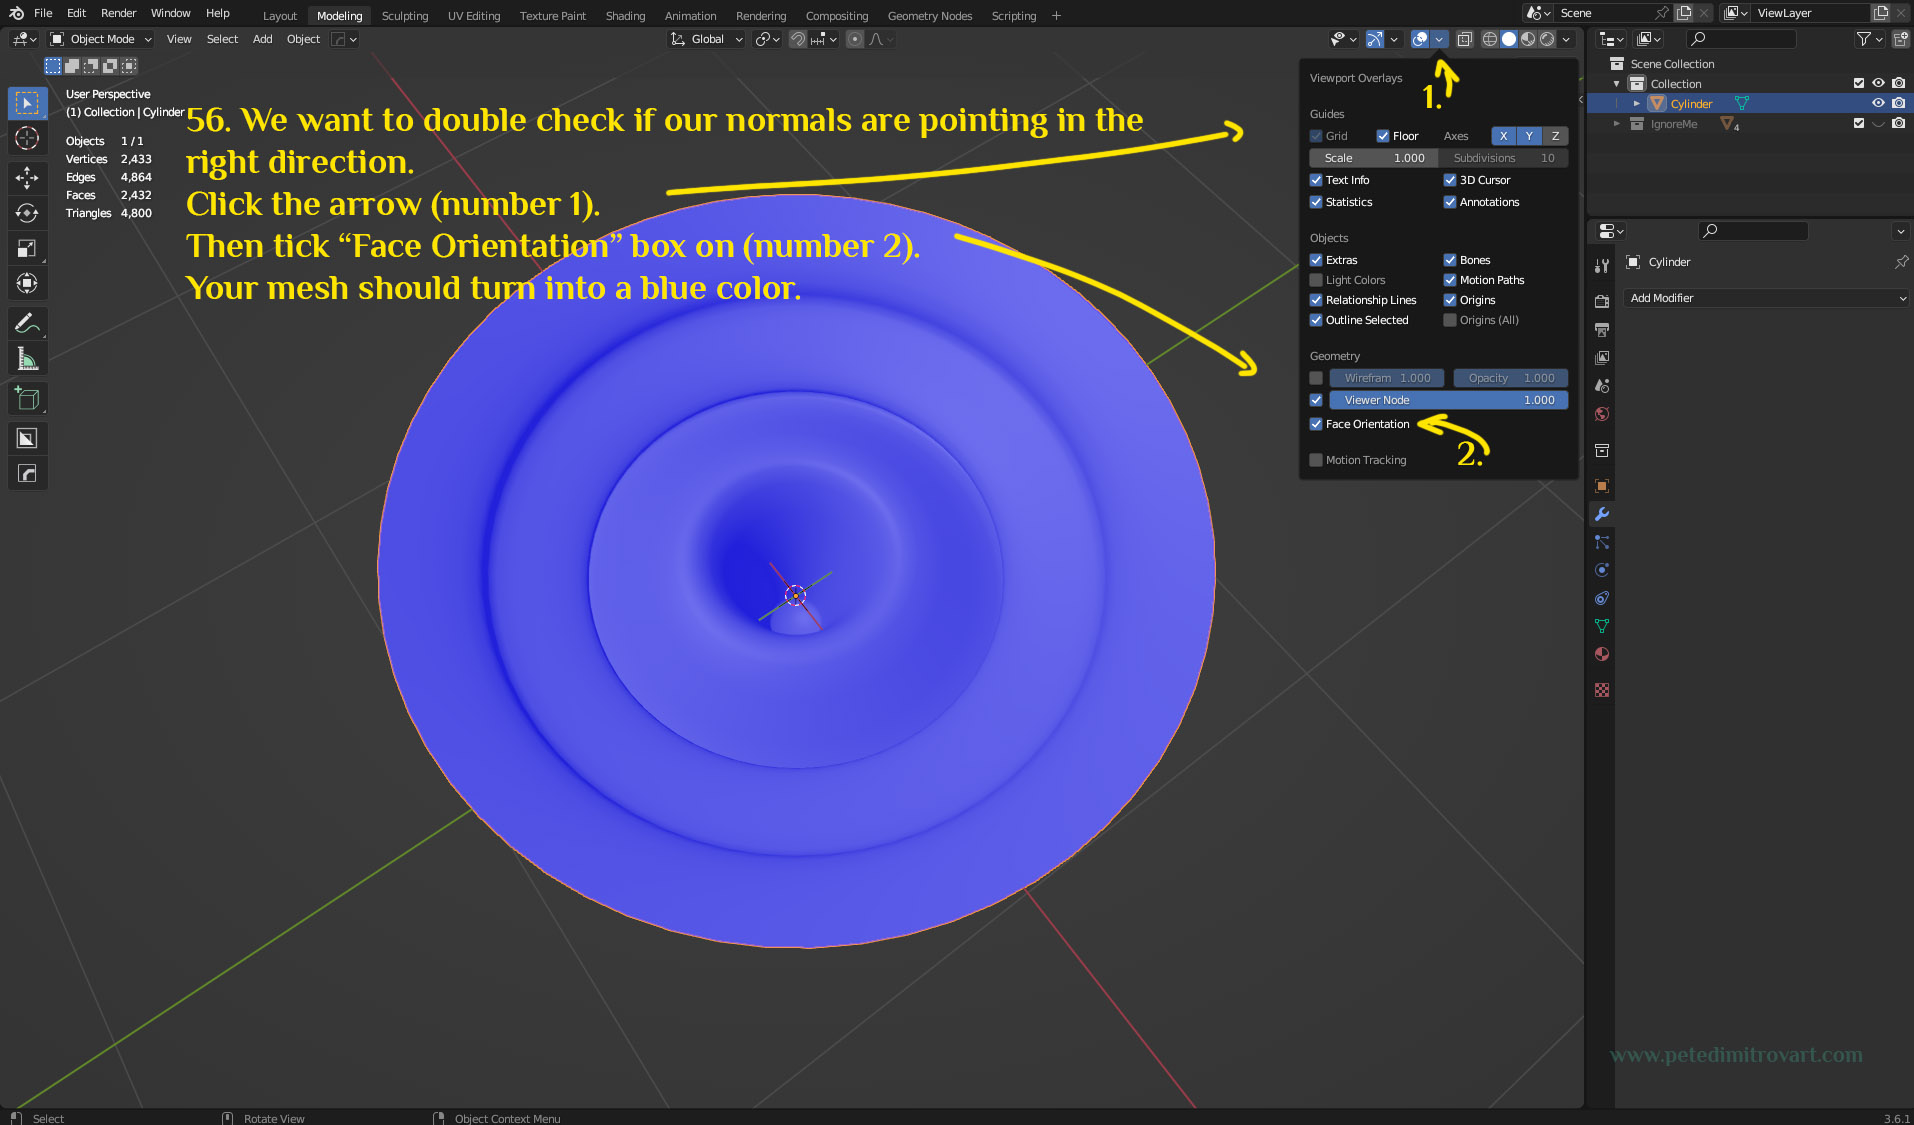 Blender UI seen where we press on the little blue arrow, marked with NUMBER 1 in yellow on the image. Dropdown menu is then show and we press NUMBER 2 arrow, which points to “Face Orientation”. The mesh gets shaded in blue color (or perhaps red, if you have an issue, but we cover that in the next image).